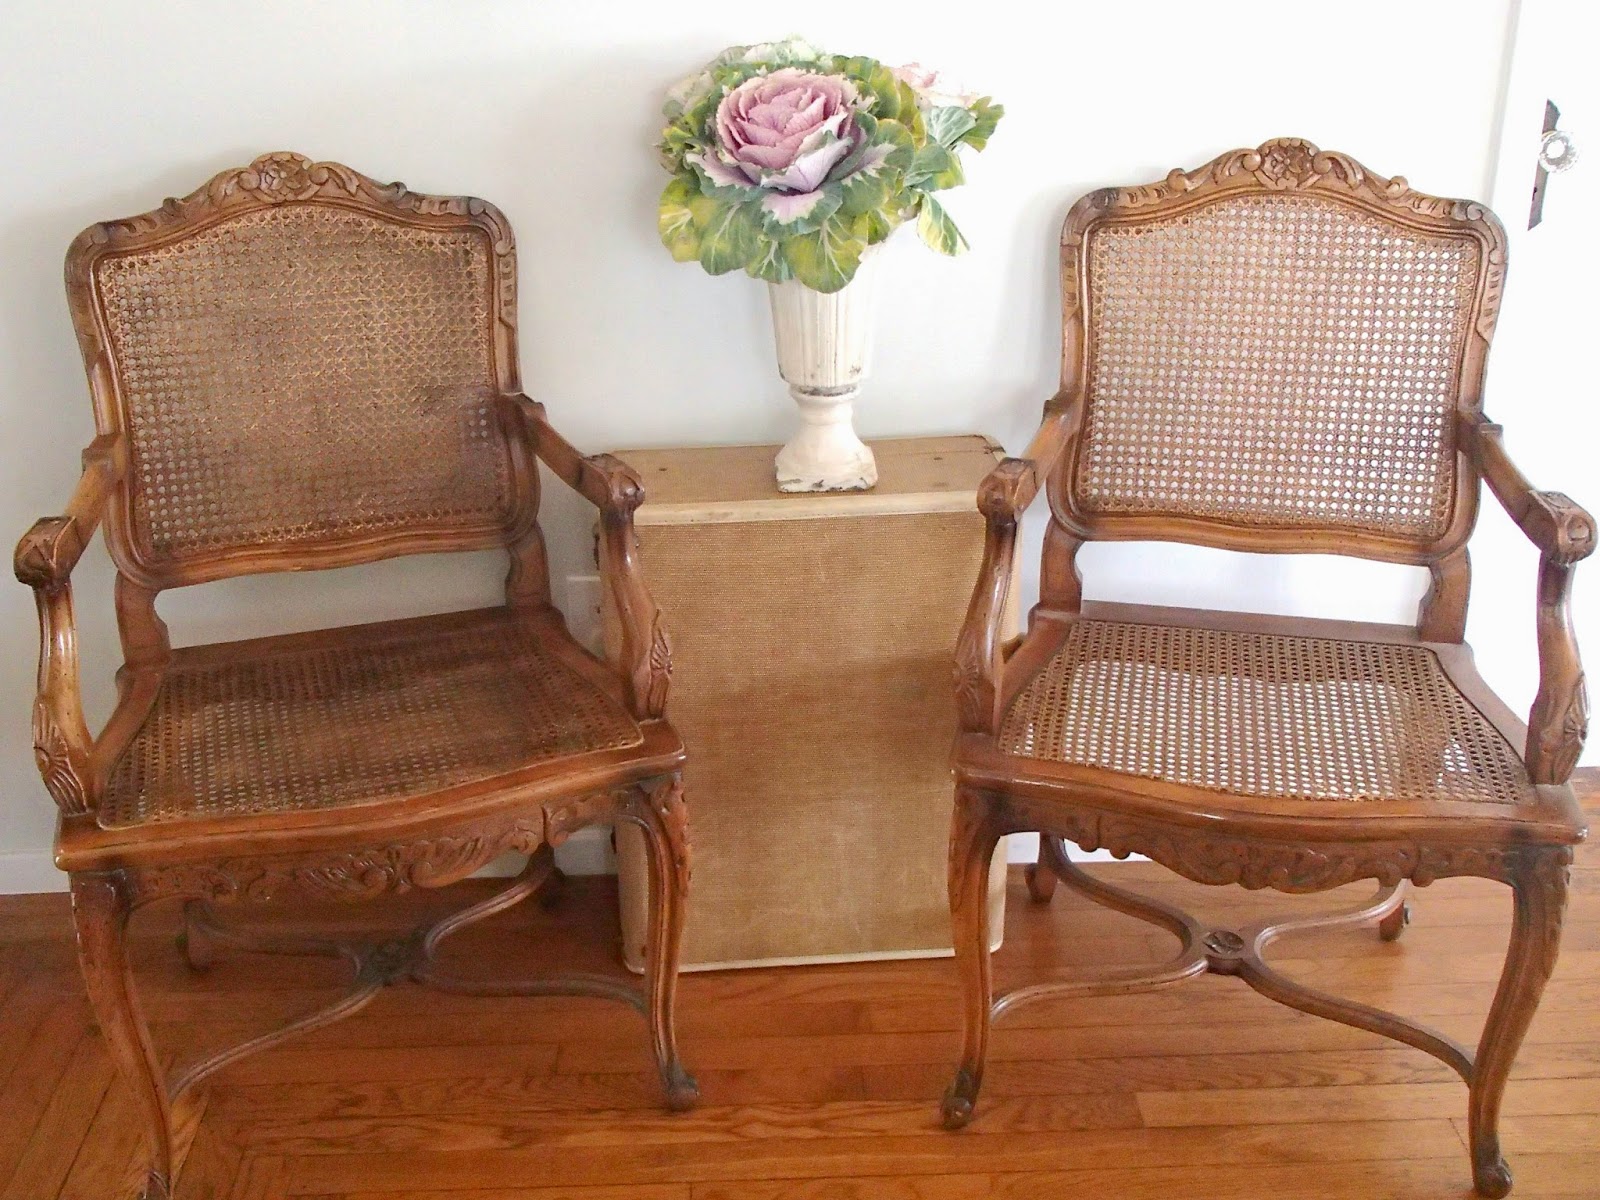 DDs Cottage And Design 4 French Cane Chairs